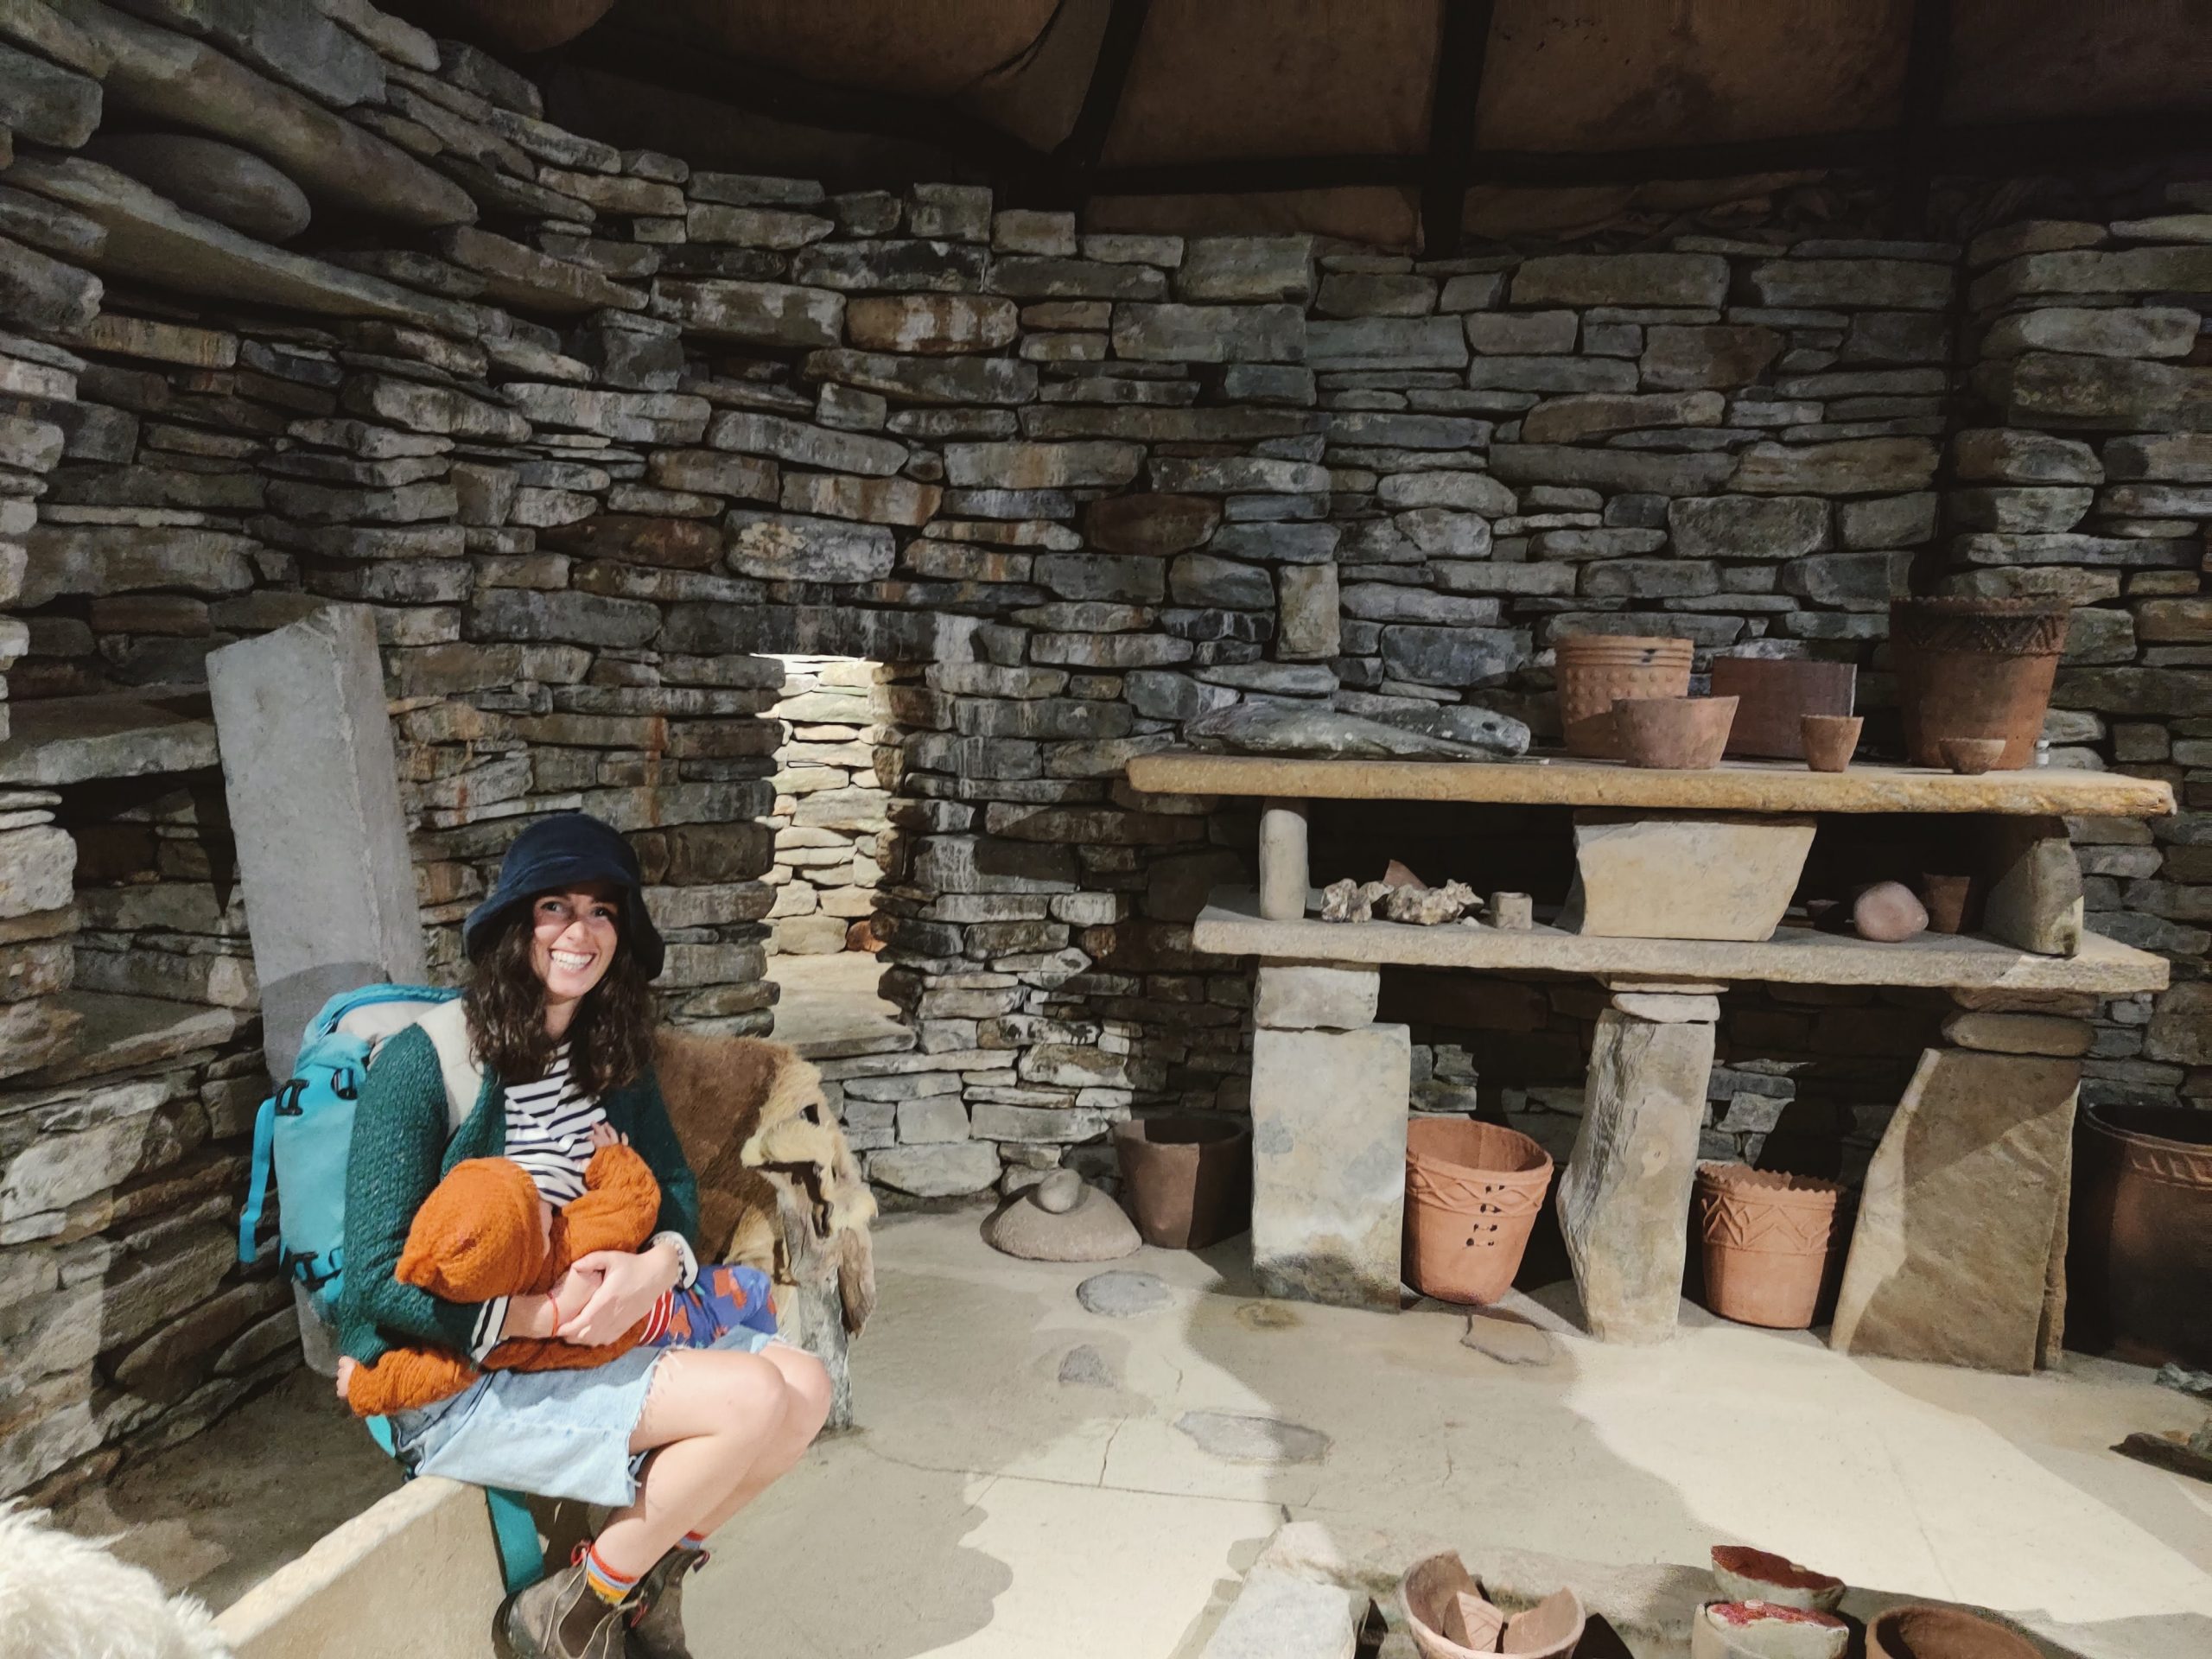 Breastfeeding in the coolest place ever - Skara Brae